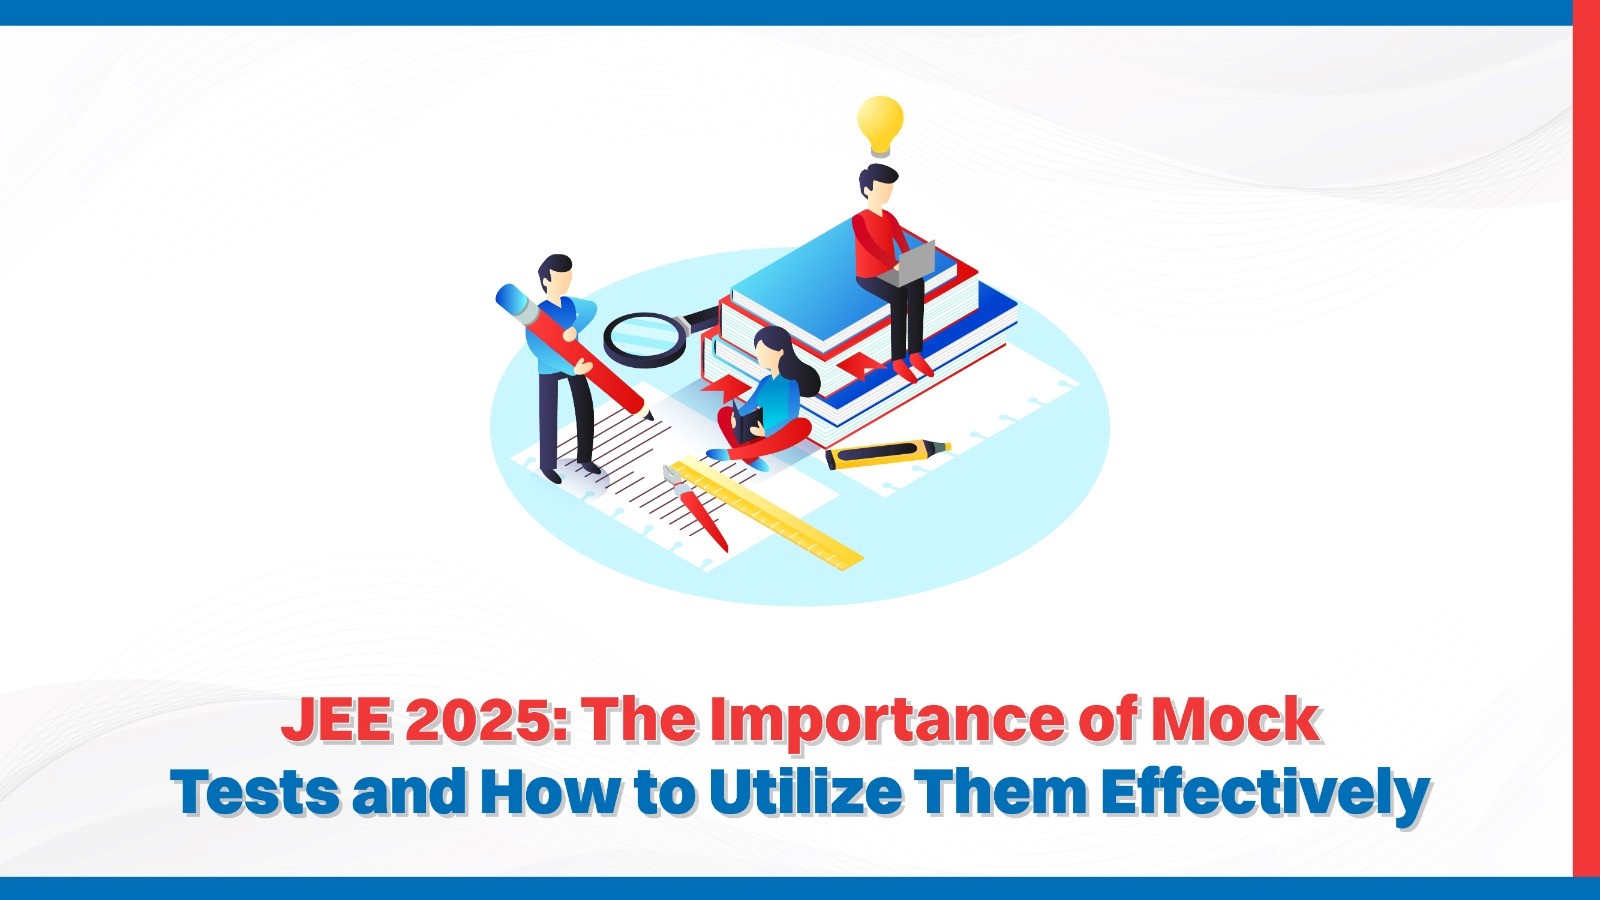 JEE 2025 The Importance of Mock Tests and How to Utilize Them Effectively.jpg